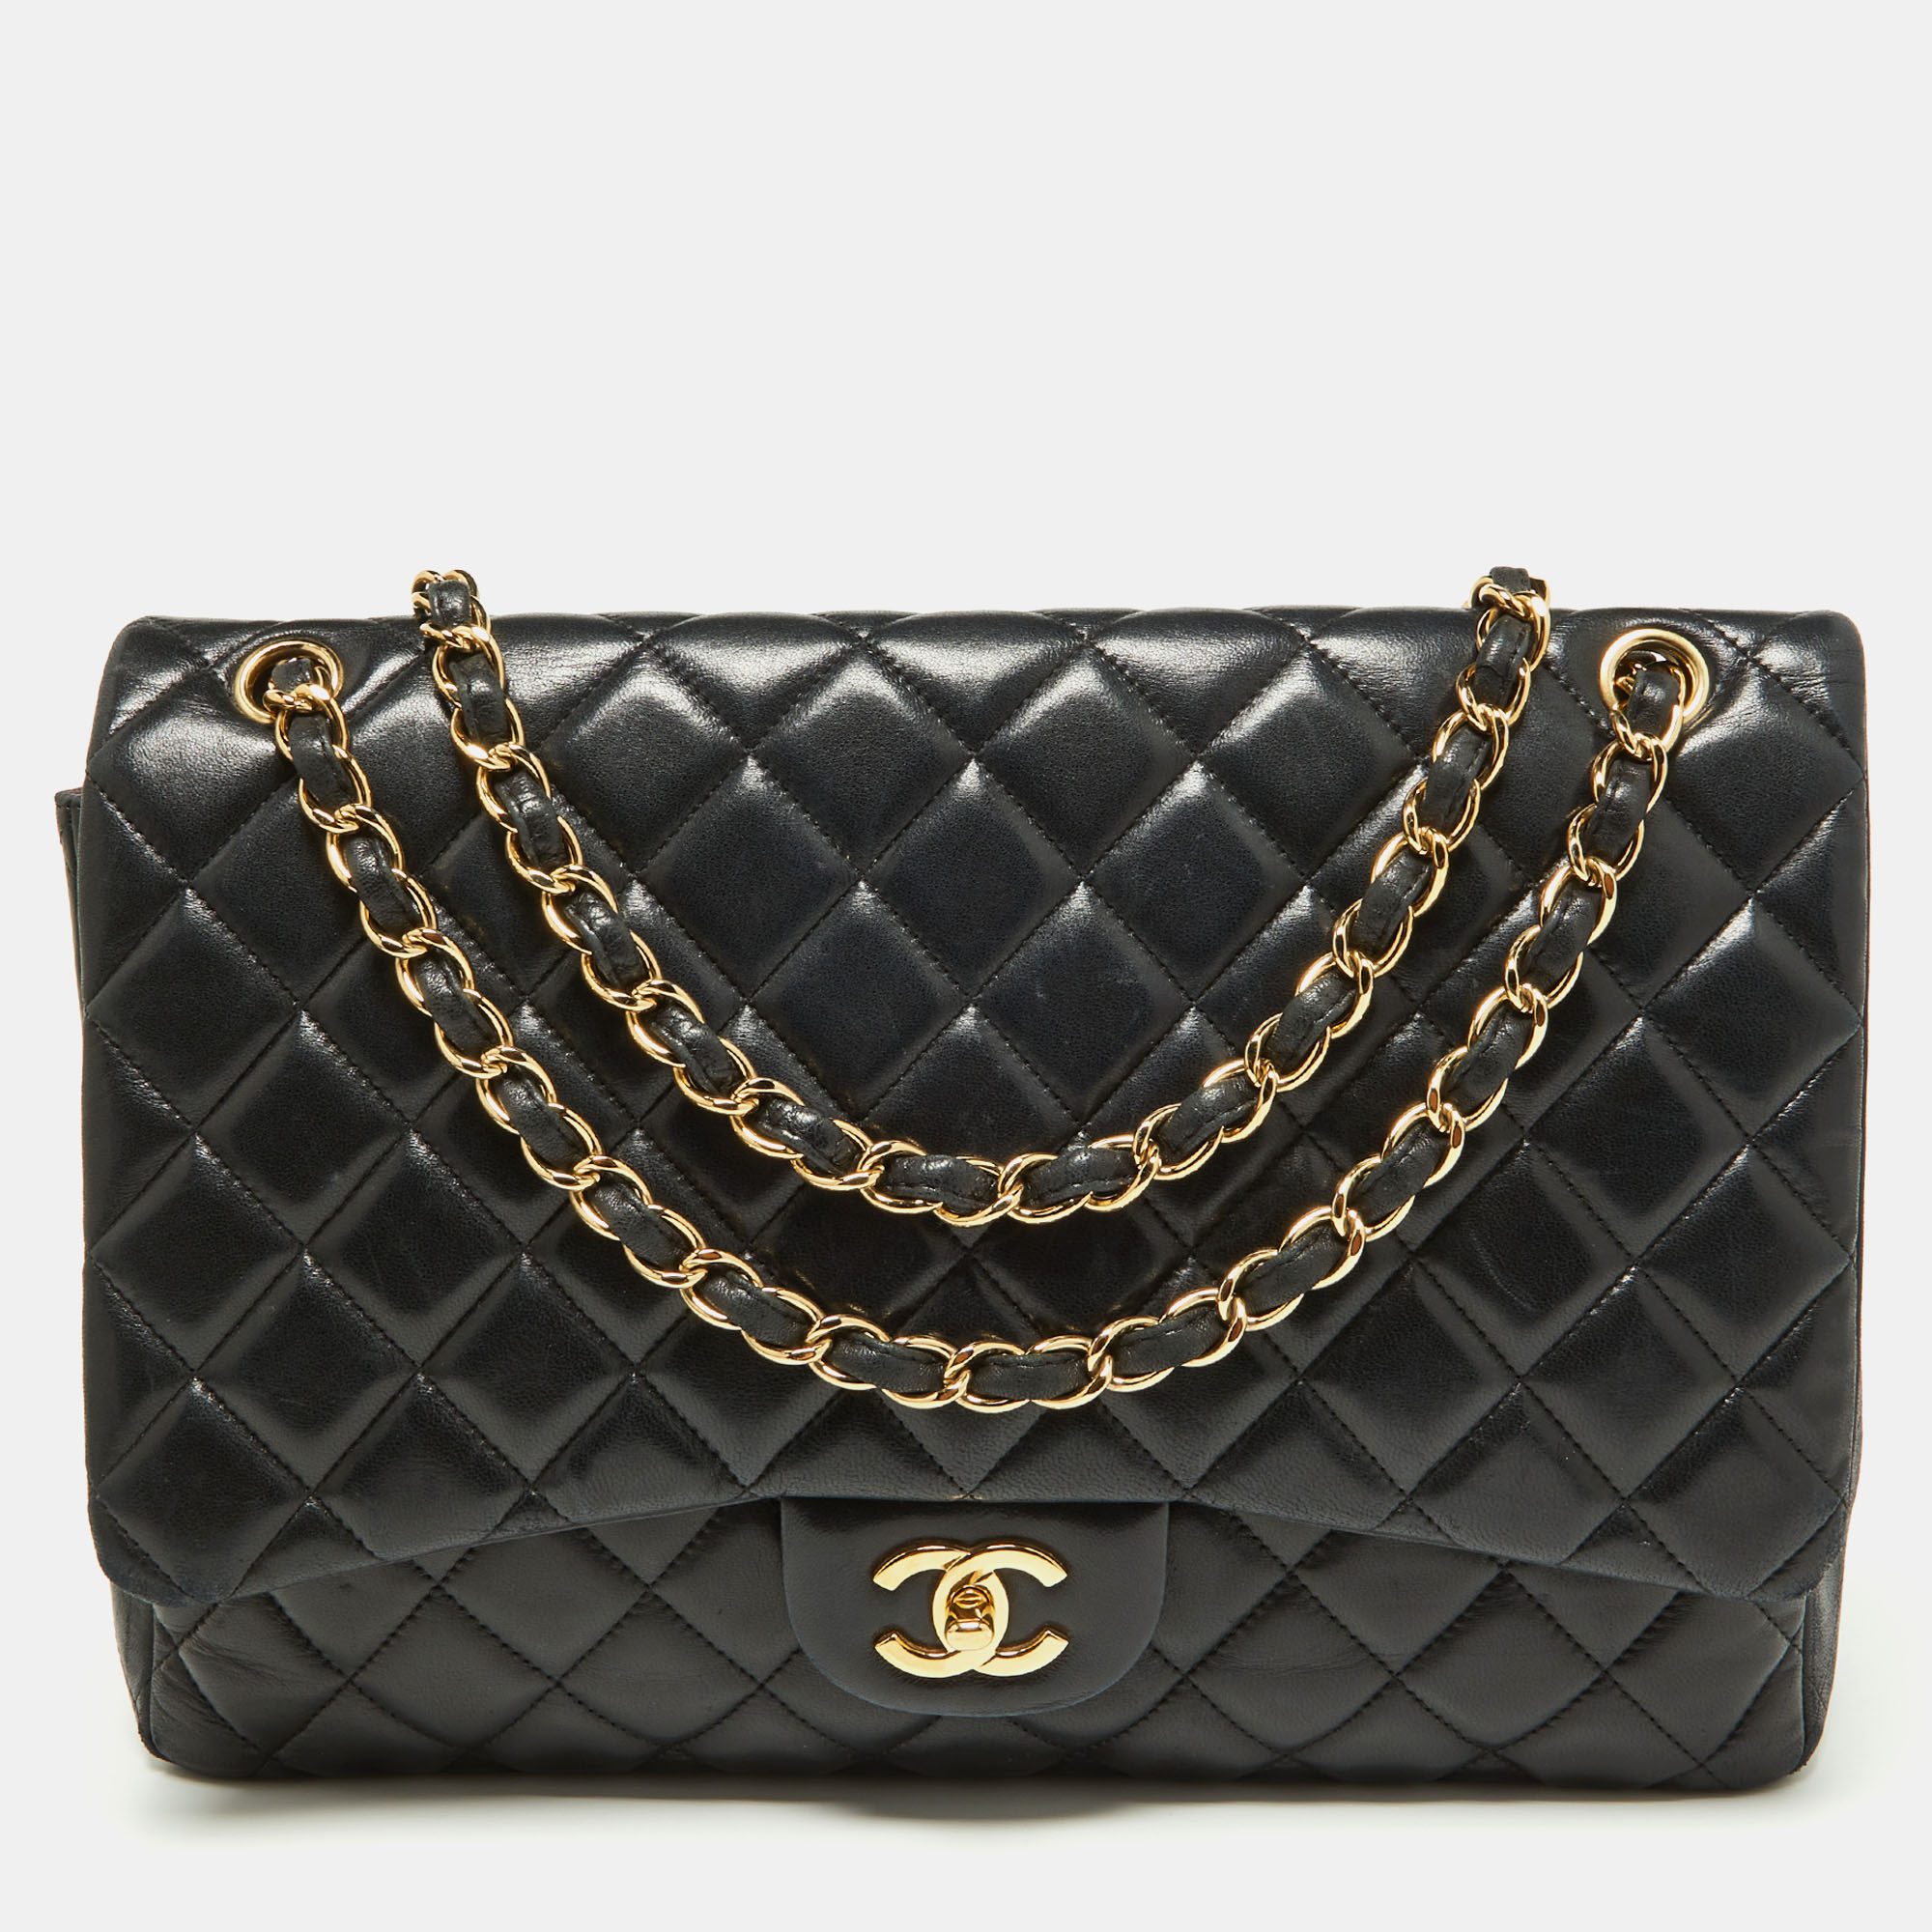 Pre-owned Chanel Black Quilted Lambskin Leather Maxi Classic Double Flap Bag